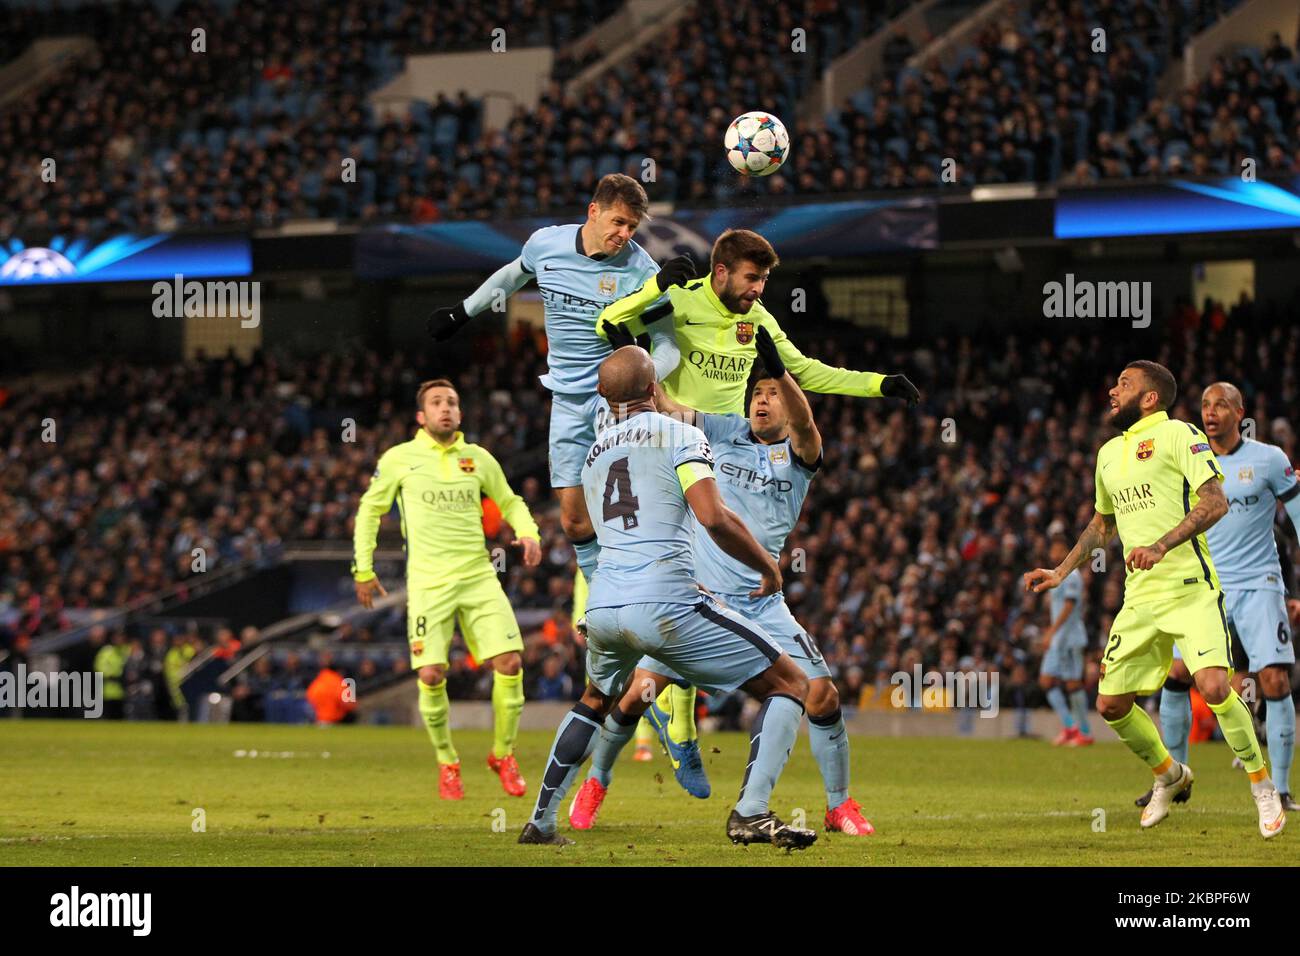 Martin Demichelis of Manchester City gets above Gerard Pique and heads at goal during the UEFA Champions League Round of 16 1st Leg between Manchester City and FC Barcelona at the Etihad Stadium, Manchester on Tuesday 24th February 2015 (Photo by Mark Fletcher/MI News/NurPhoto) Stock Photo